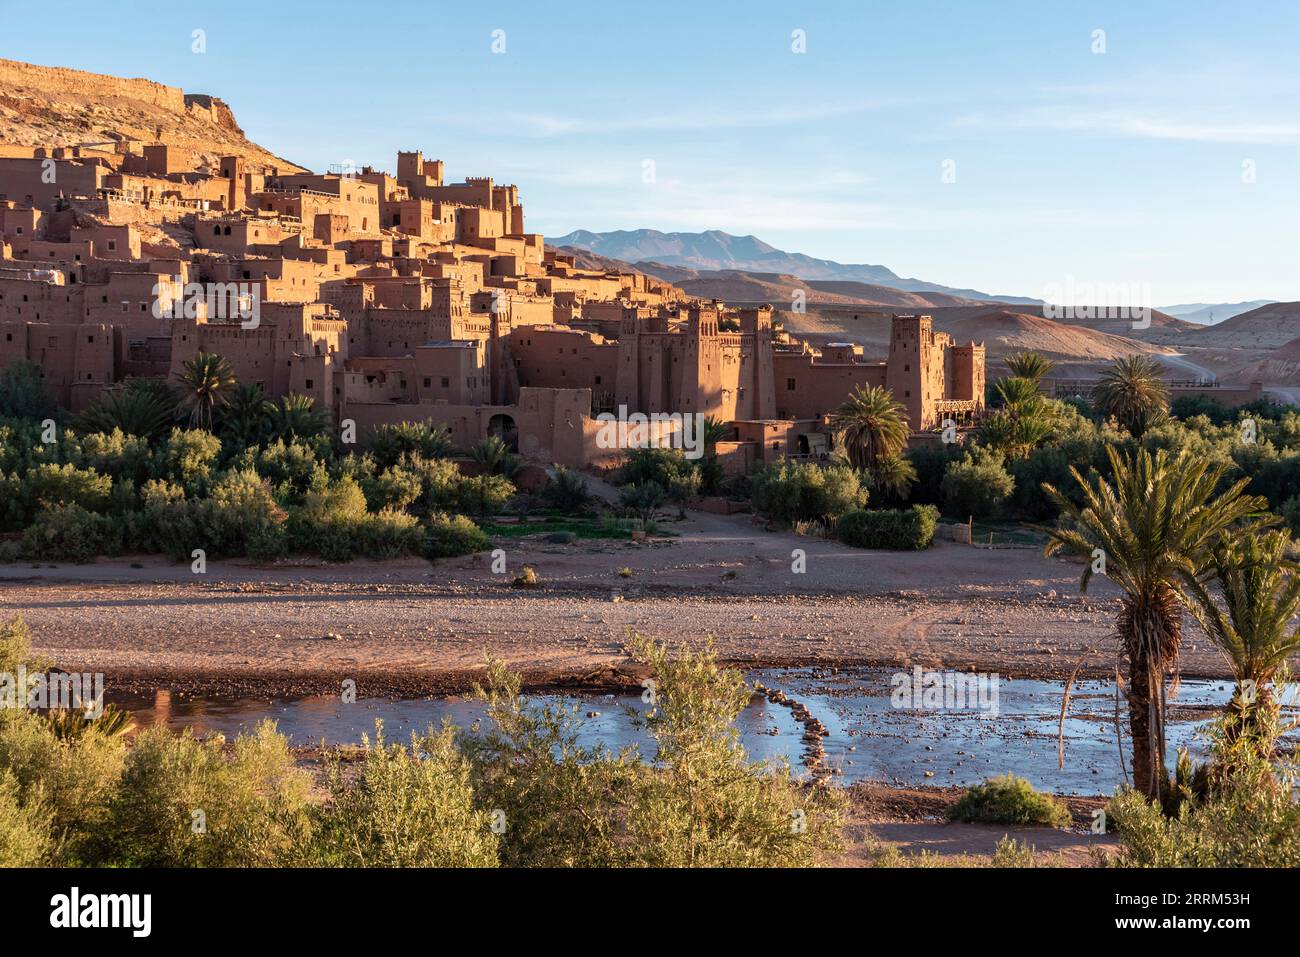 Sunrise over the beautiful historic town Ait Ben Haddou in Morocco, famous berber town with many kasbahs built of clay, UNESCO world heritage Stock Photo